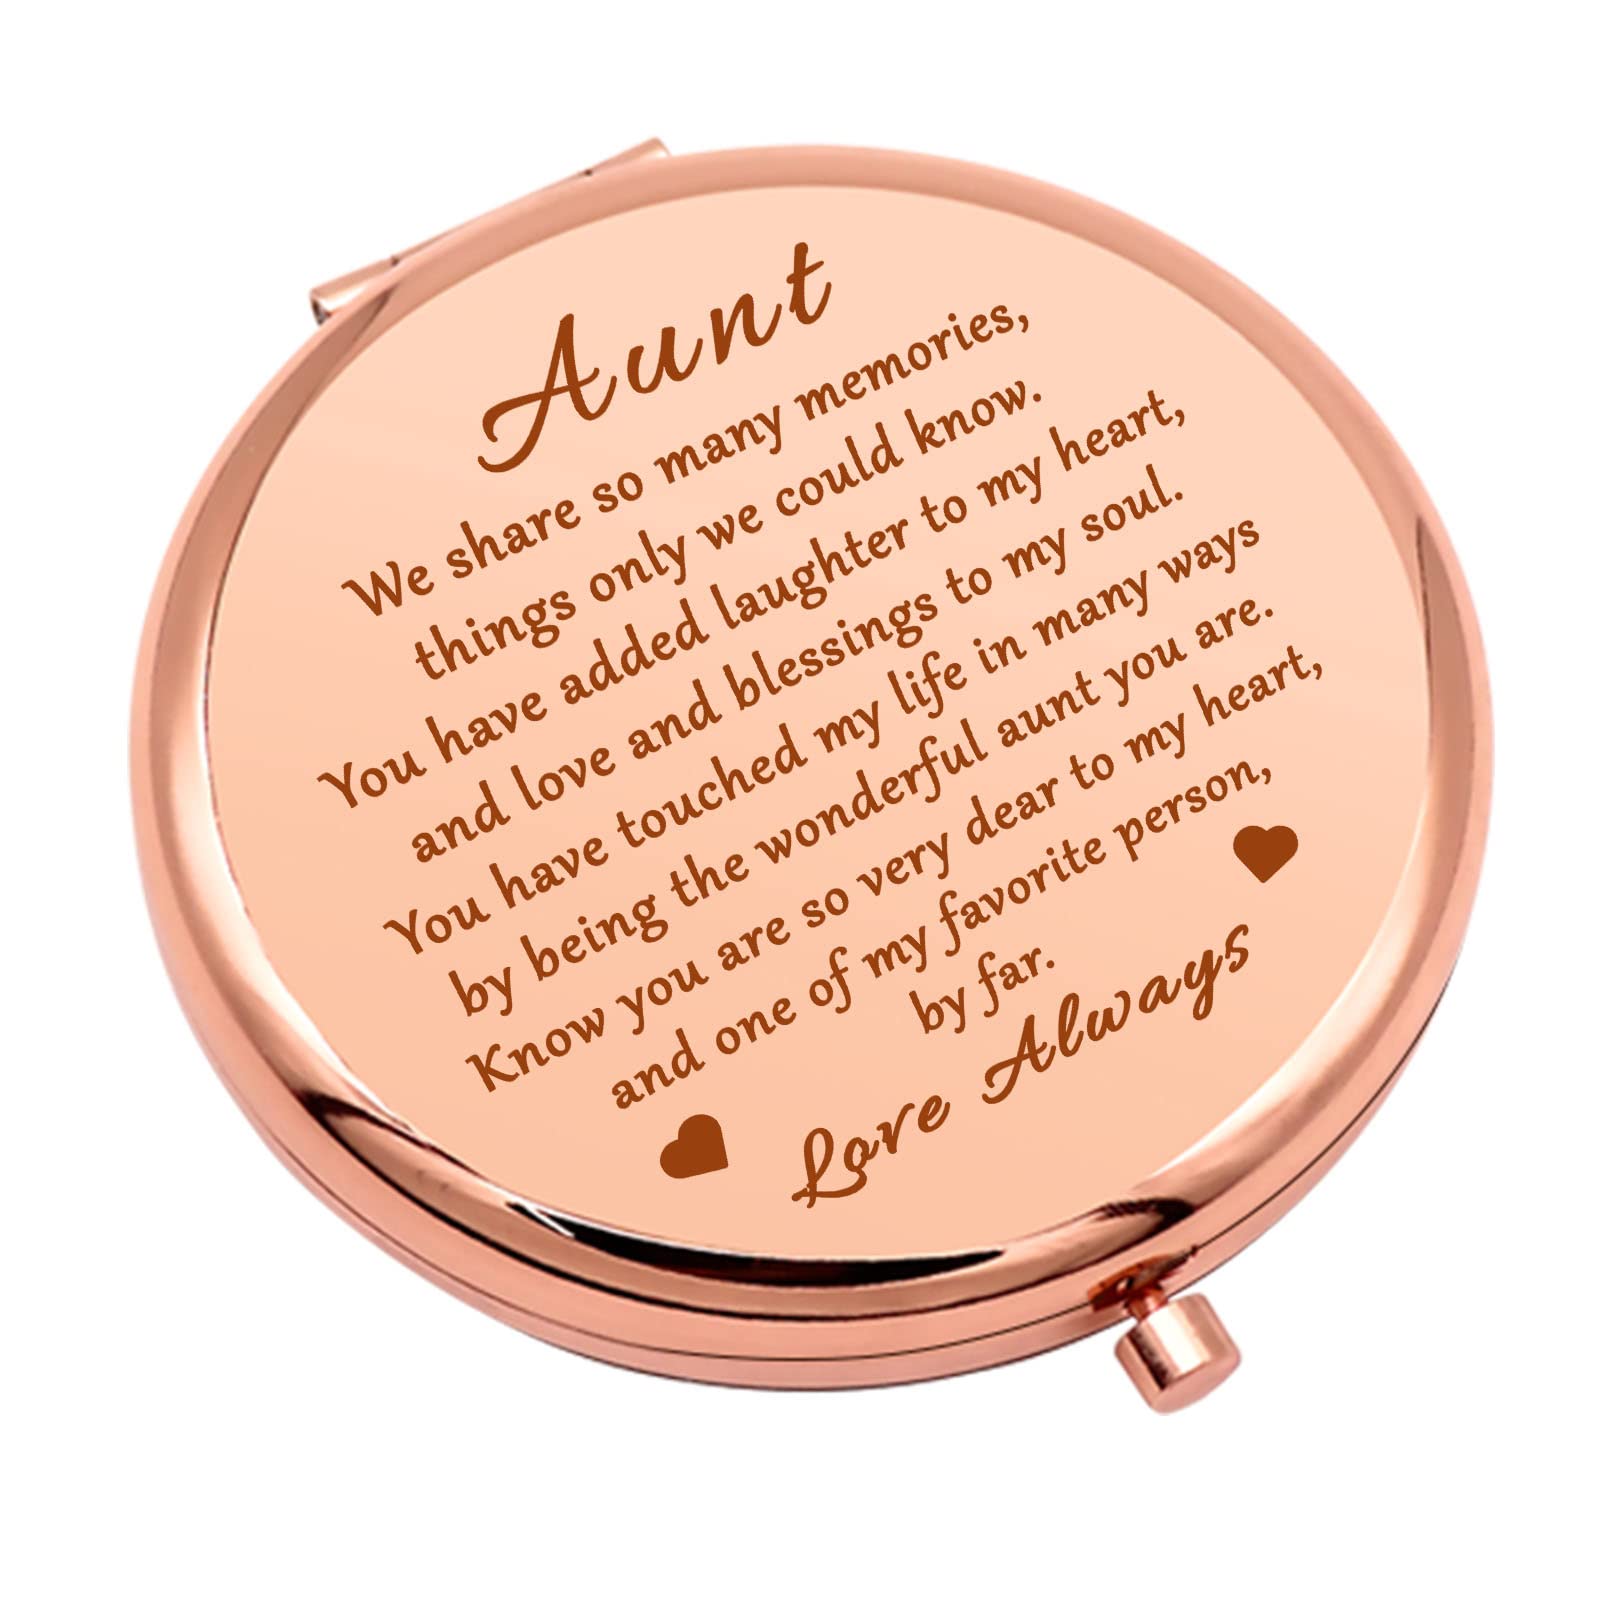 Buy Best Aunt Ever Gifts Funny Mug for Favorite Aunt from Niece Nephew,  11oz Funny Coffee Mug for Great Auntie Birthday Valentines Day Xmas Gifts  Online at Low Prices in India -